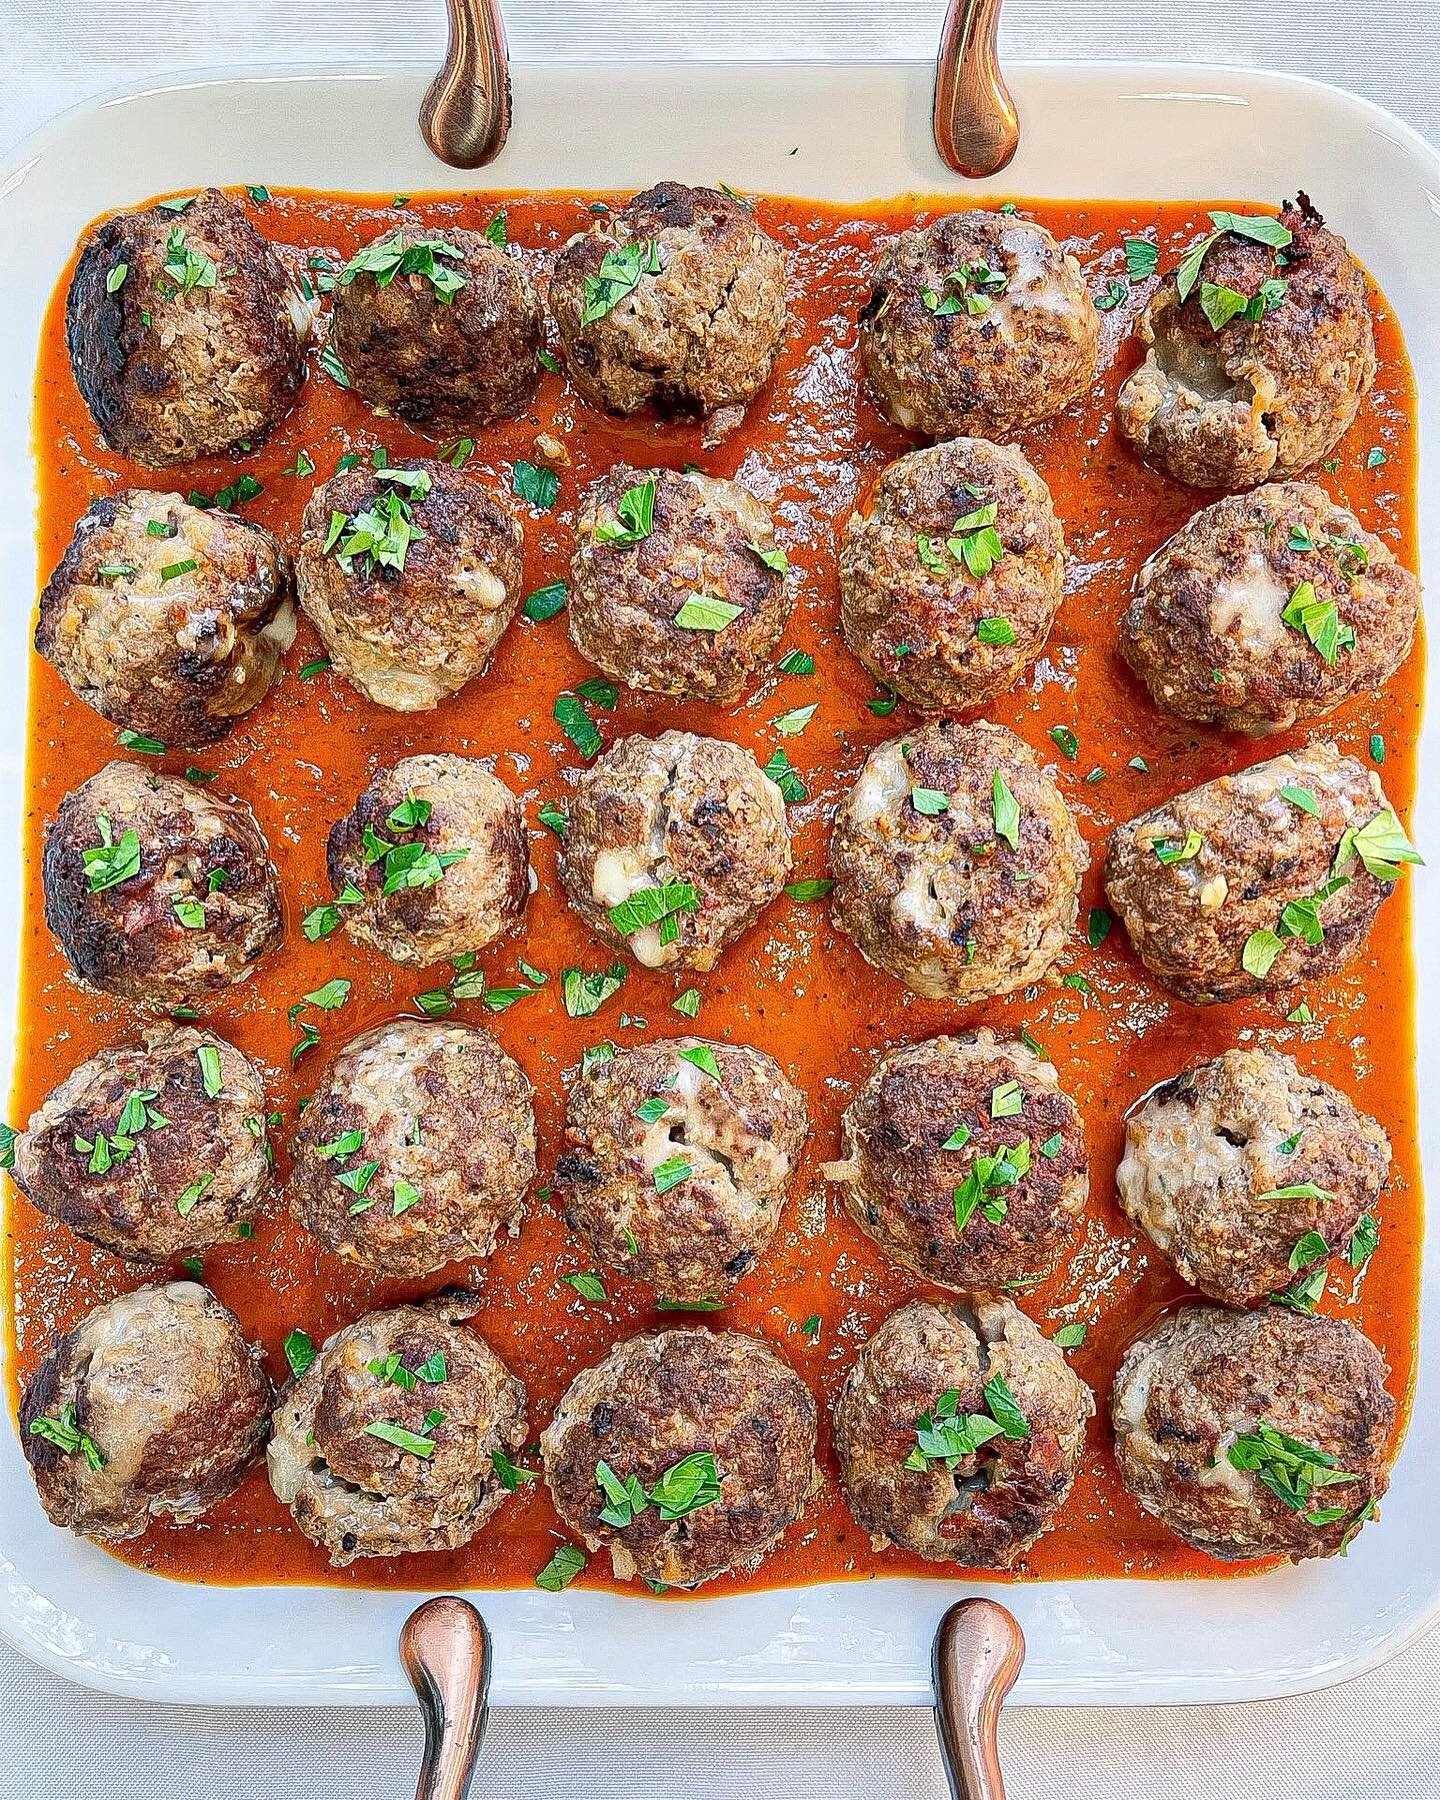 Mean, lean bison meatballs with mozzarella and vodka sauce. Made with 100% grass fed @forceofnaturemeats ancestral blend. We love their products and their approach to regenerative farming.

Fun fact: Rather than seeking shelter from bad weather, biso